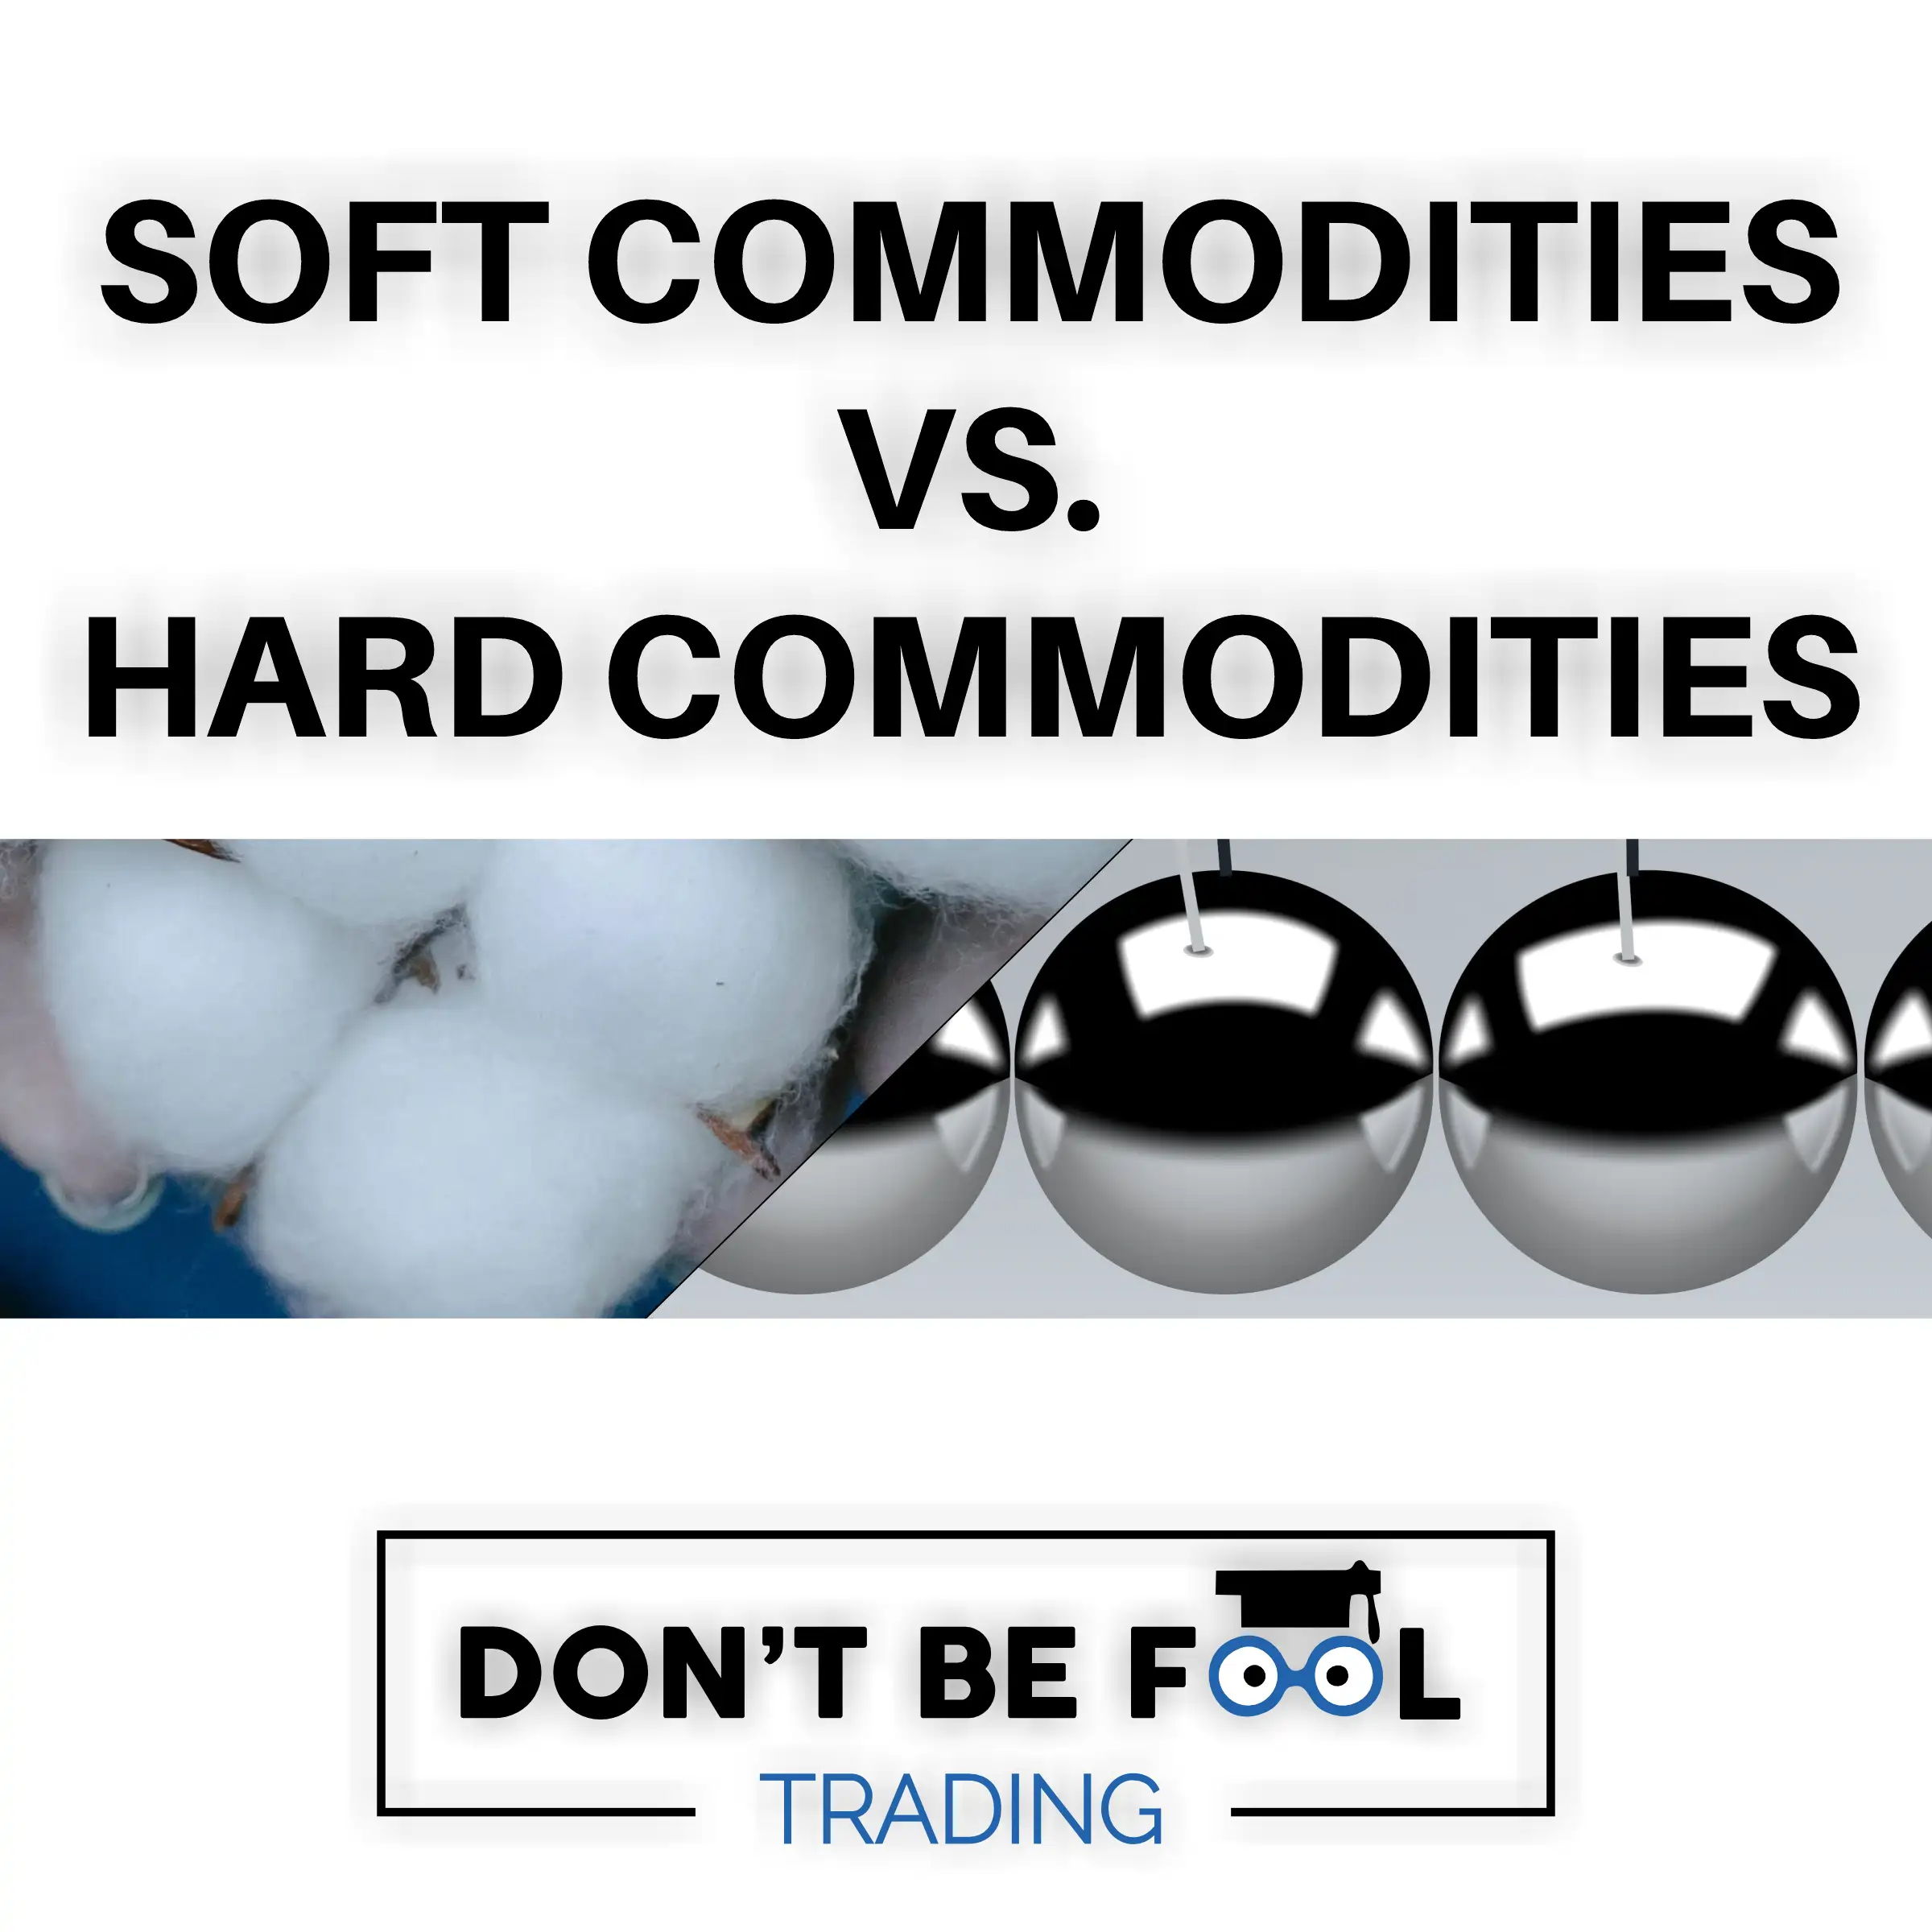 black text on white background saying Soft Commodities vs. Hard Commodities below some cotton knob and some metal balls and below the dontbefool logo